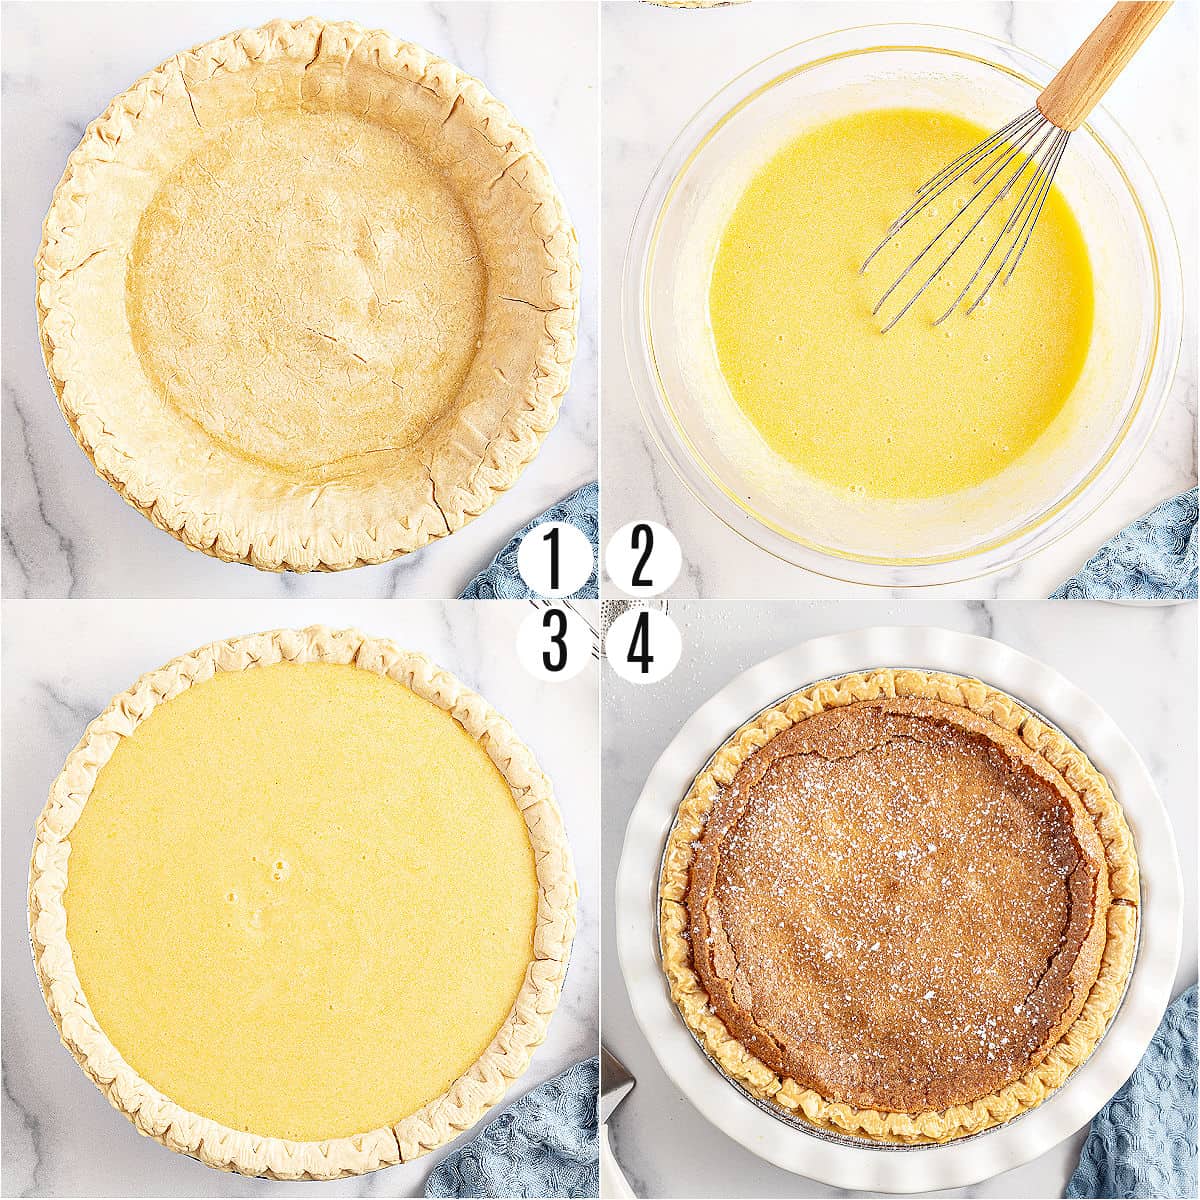 Step by step photos showing how to make chess pie.